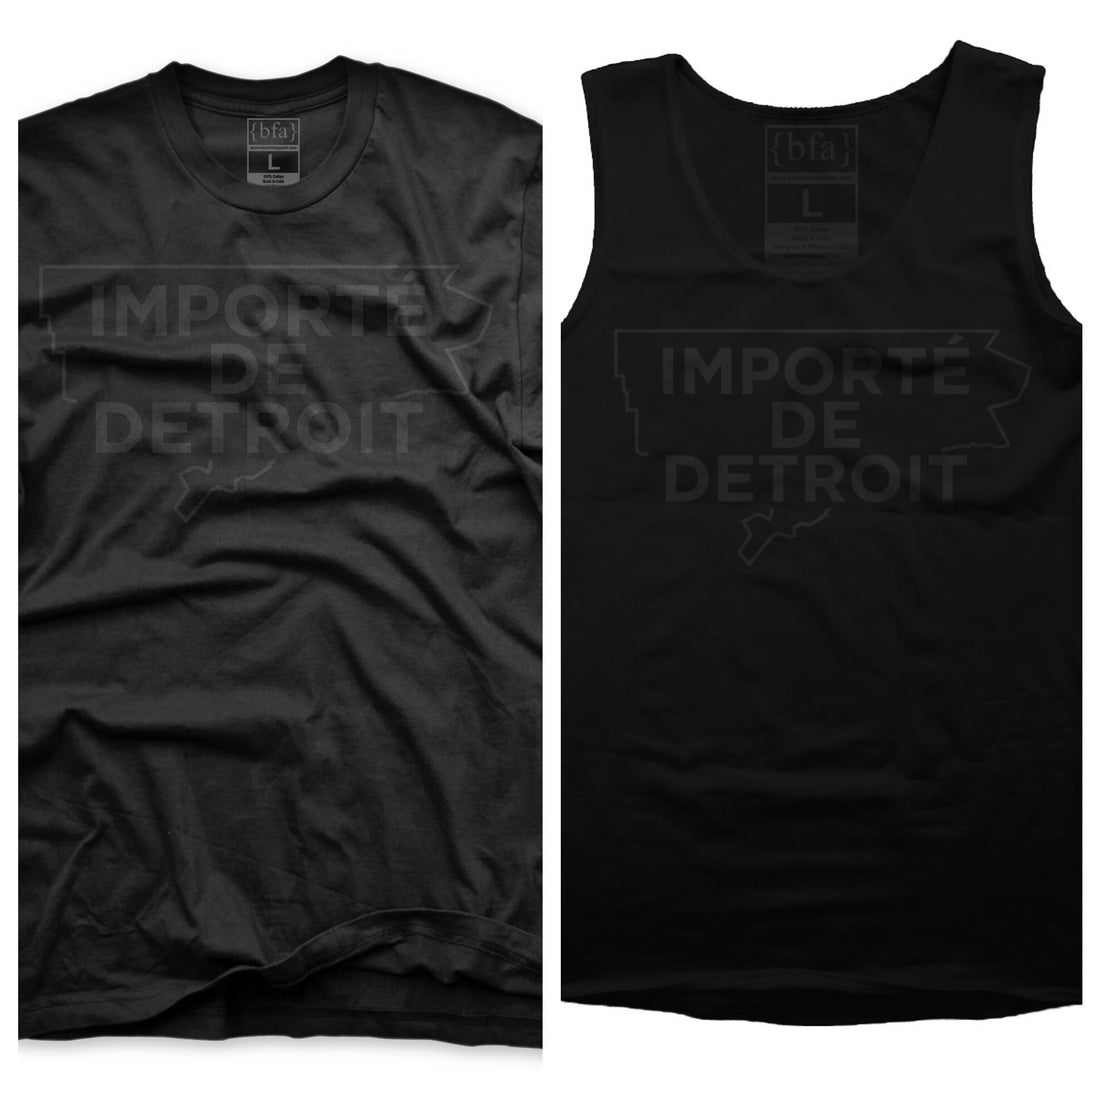 Importe de Detroit T-Shirts and Tanktops available this weekend